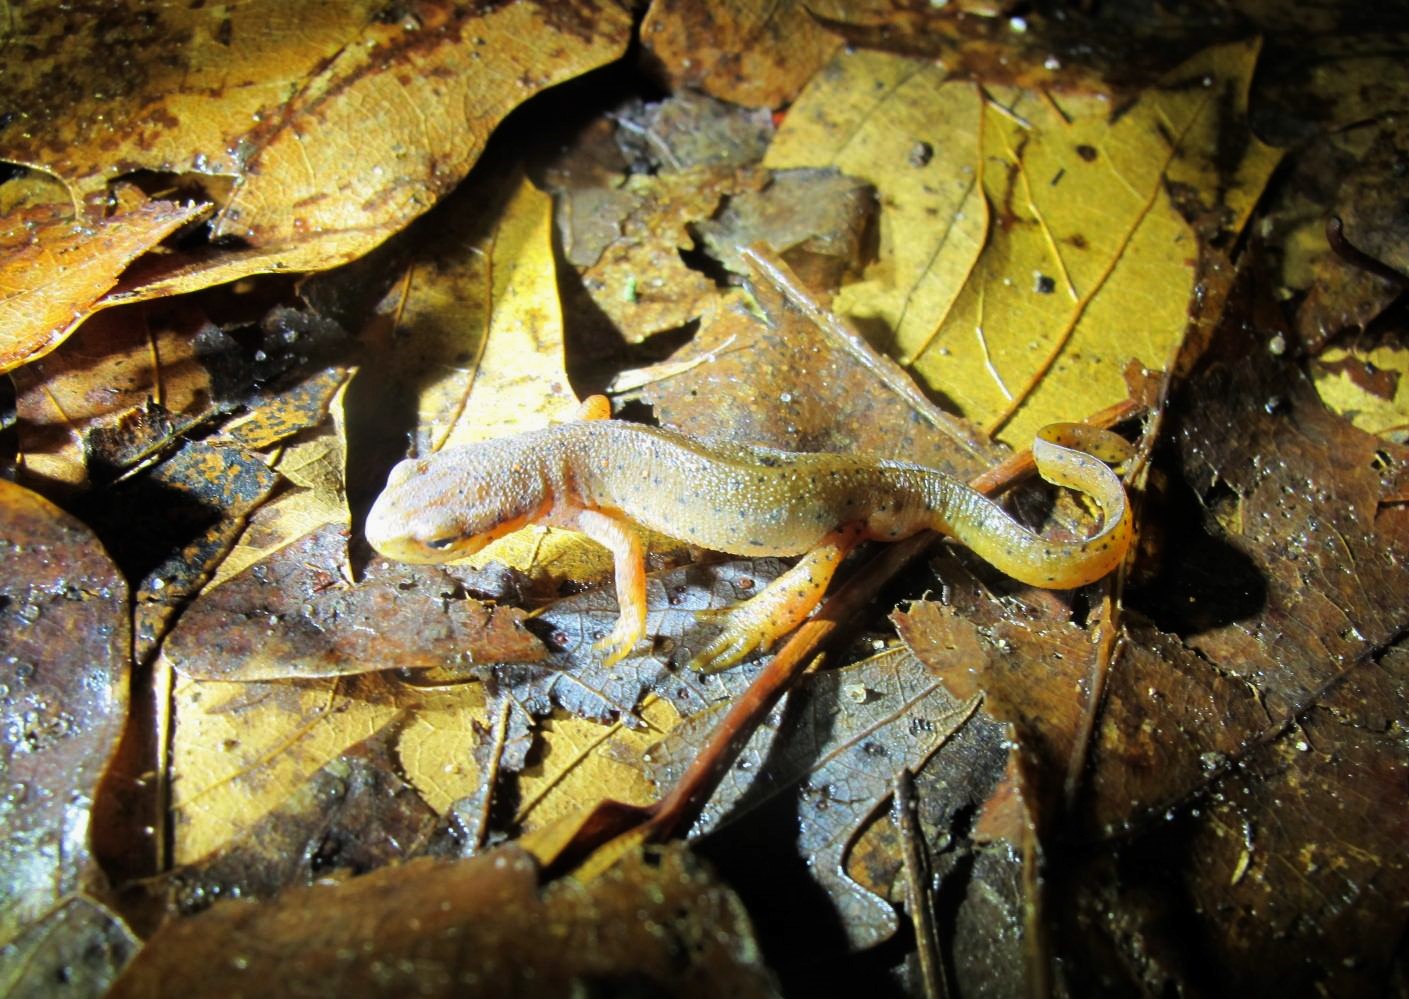 A close-up photo of a red spotted newt on wet and yellowing leaves on the ground. Contrary to its name, this newt is pale greenish-brown in color with yellow legs.